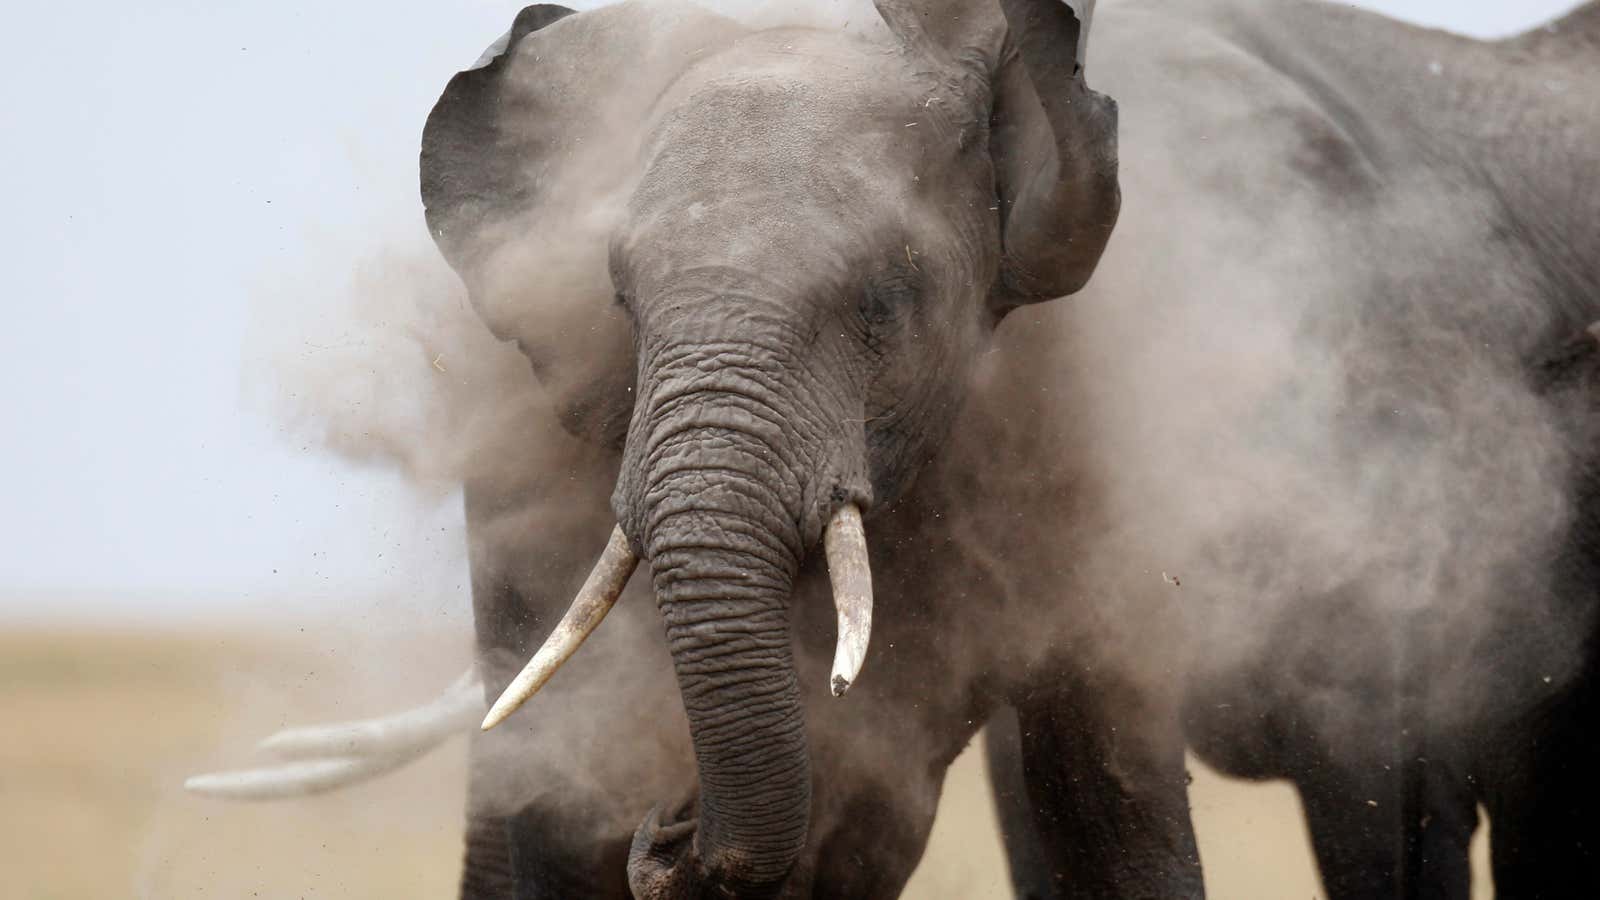 An average of 40 000 elephants are killed annually in Africa.